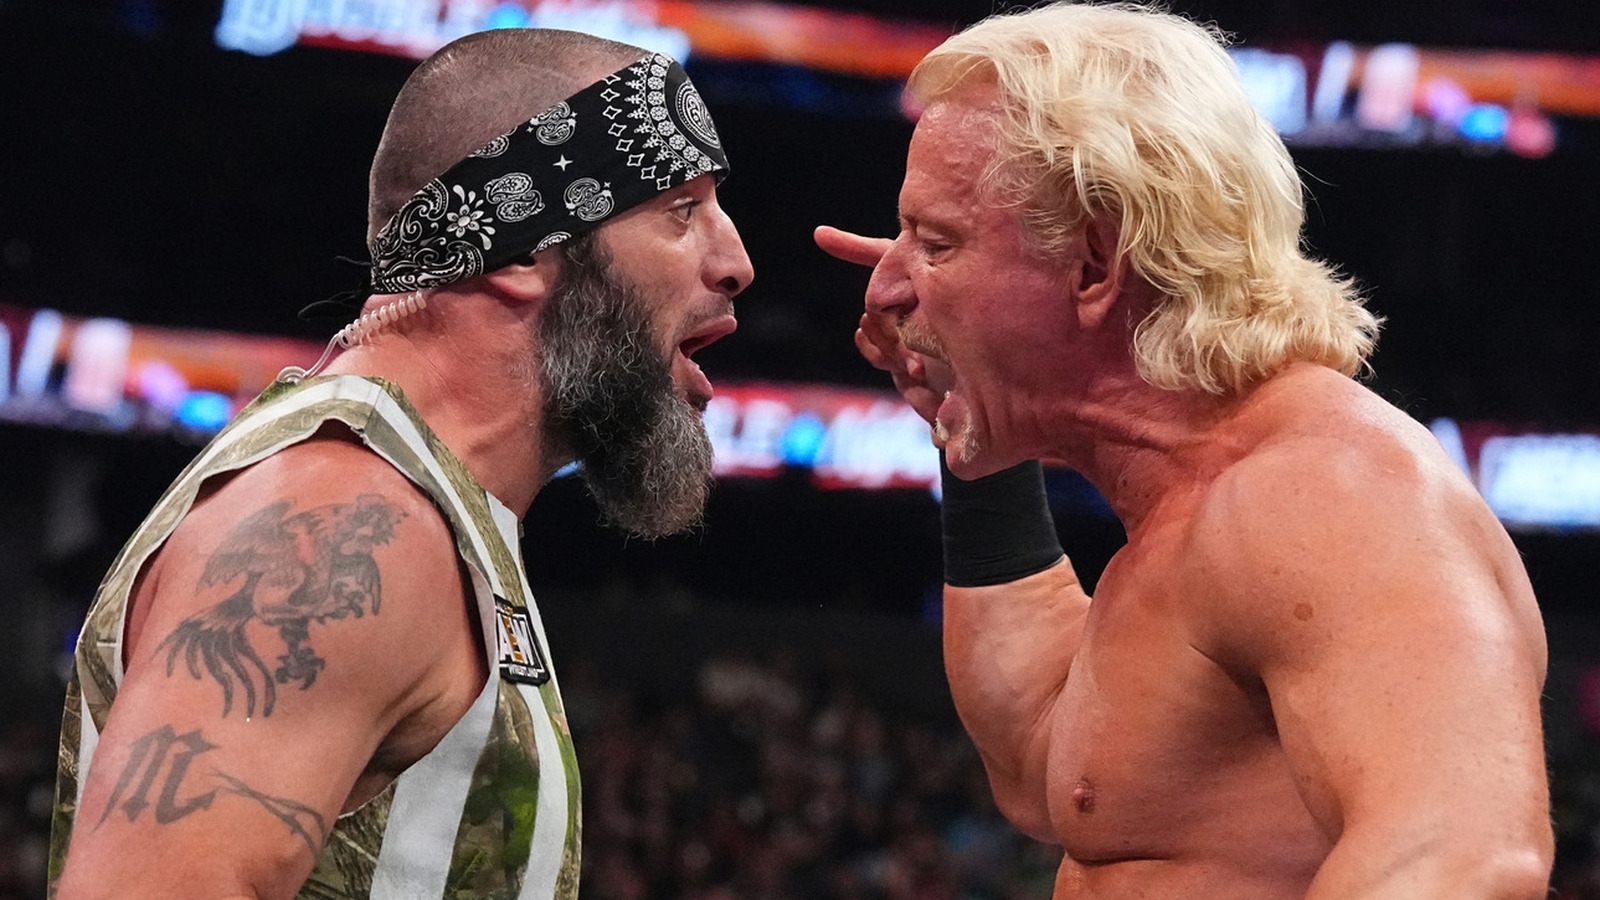 Jeff Jarrett Raises The Stakes For Concession Stand Brawl Against Mark Briscoe